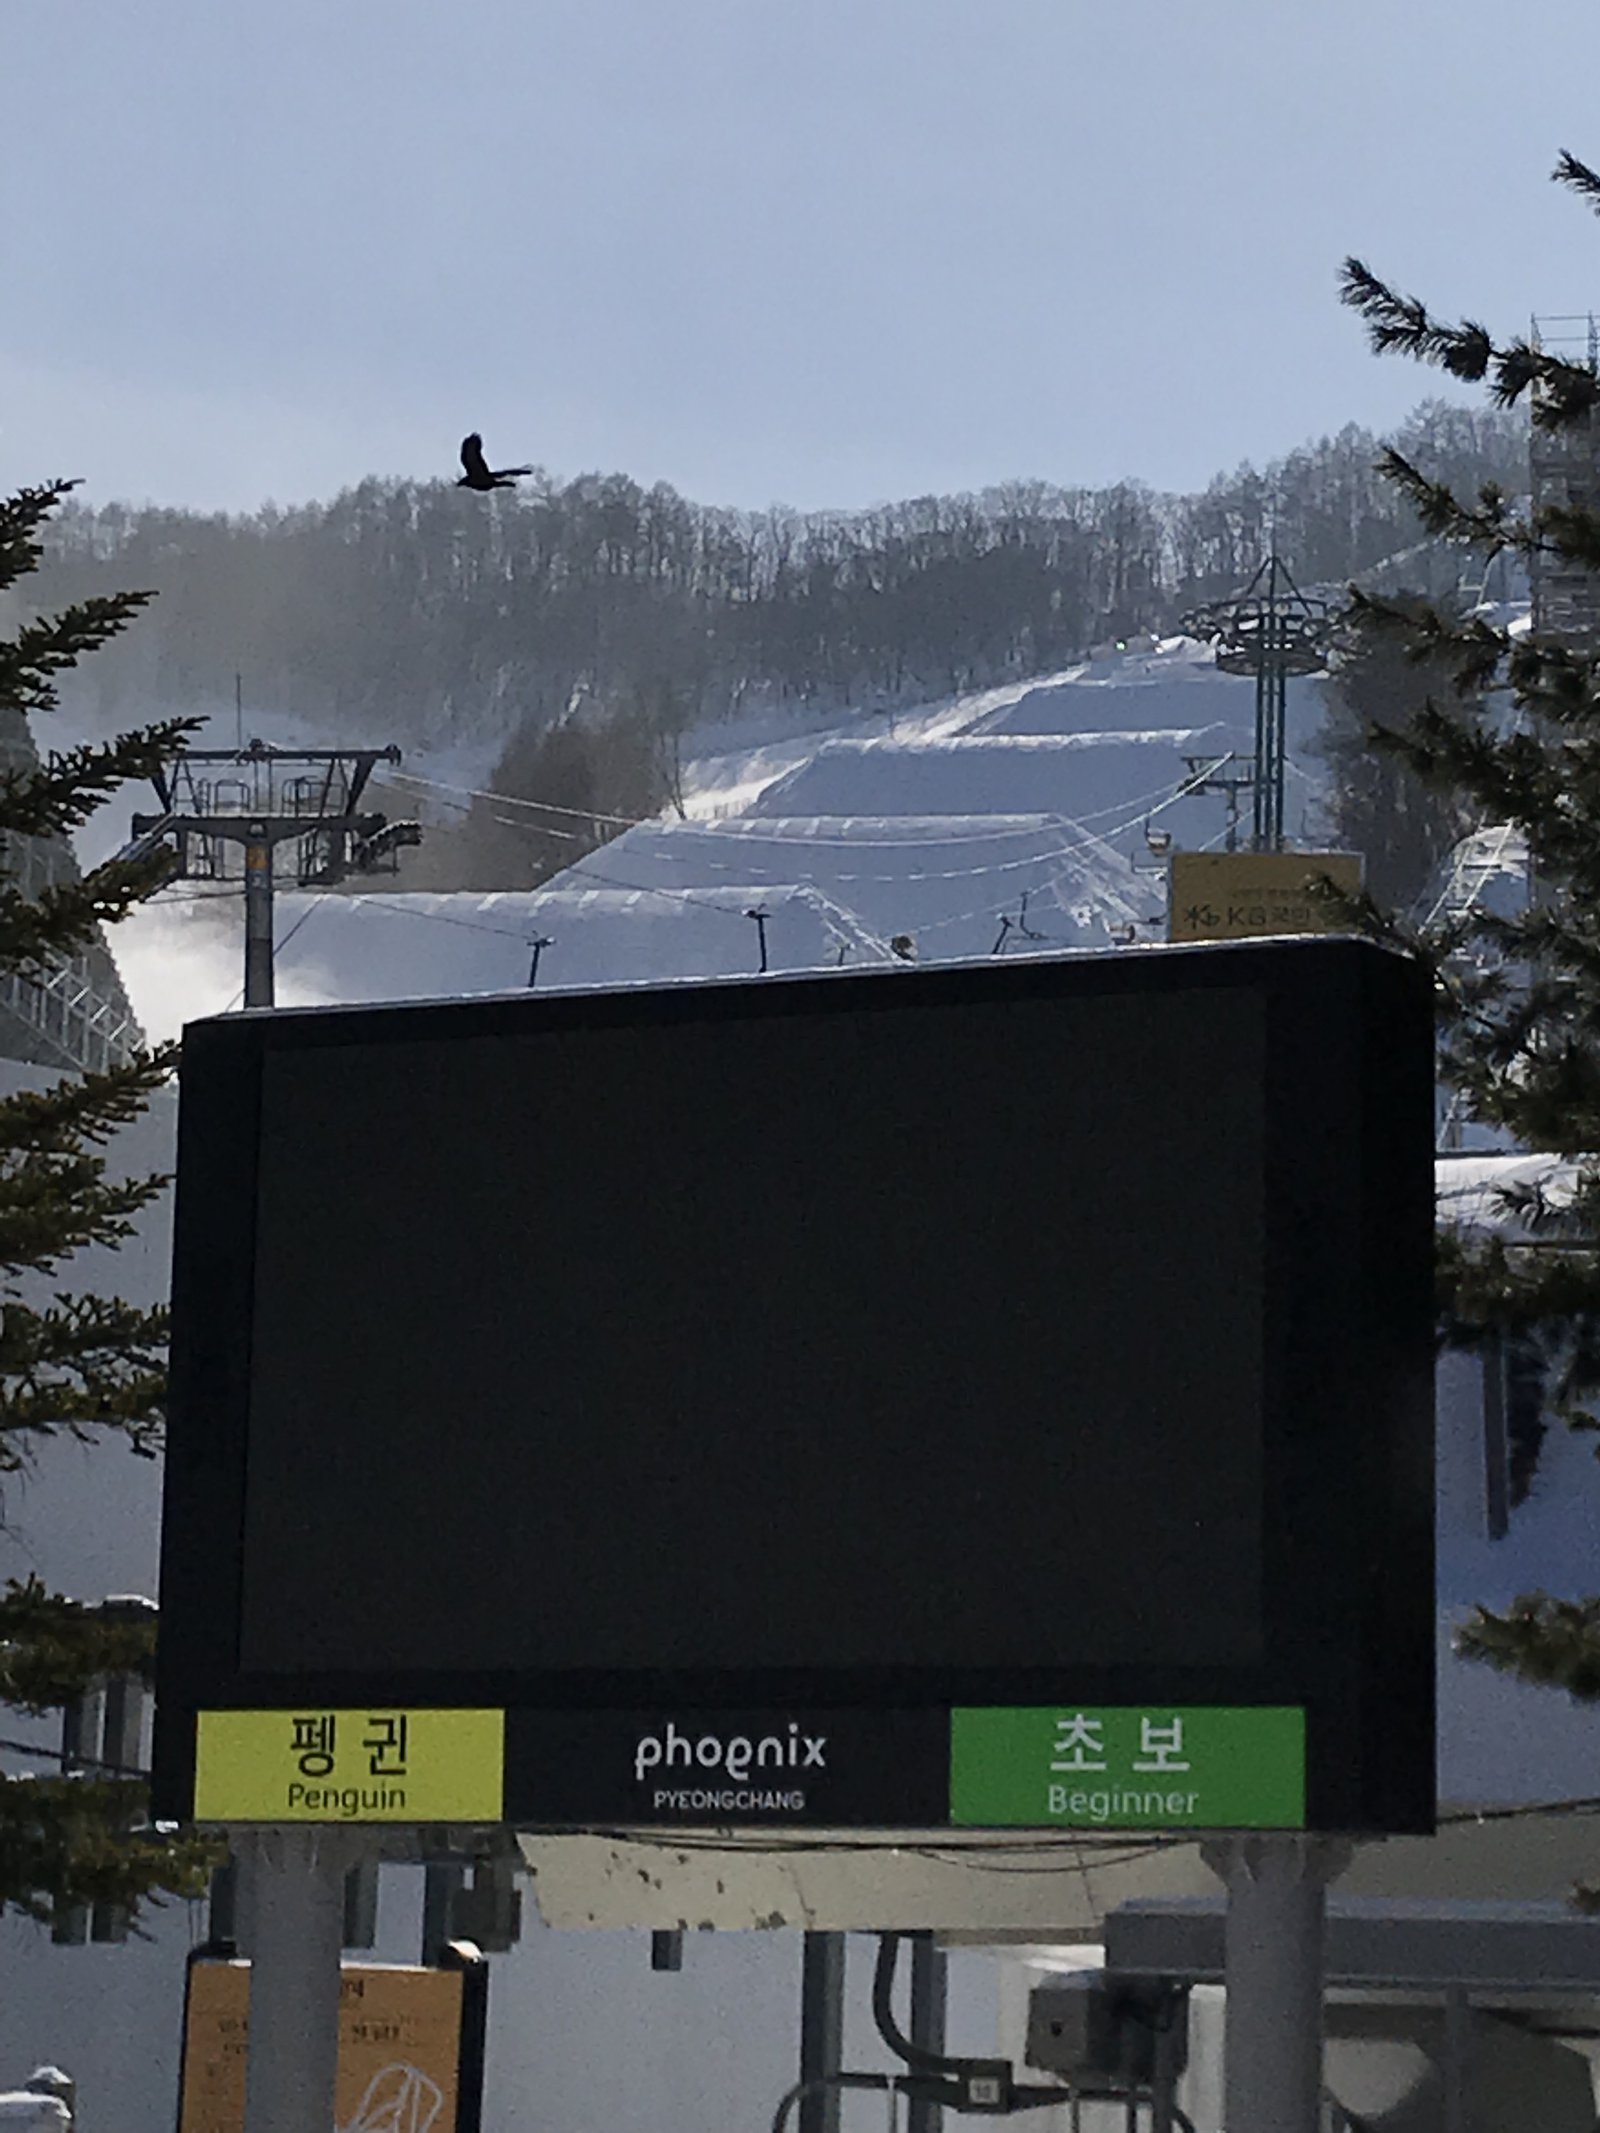 Olympic slope build